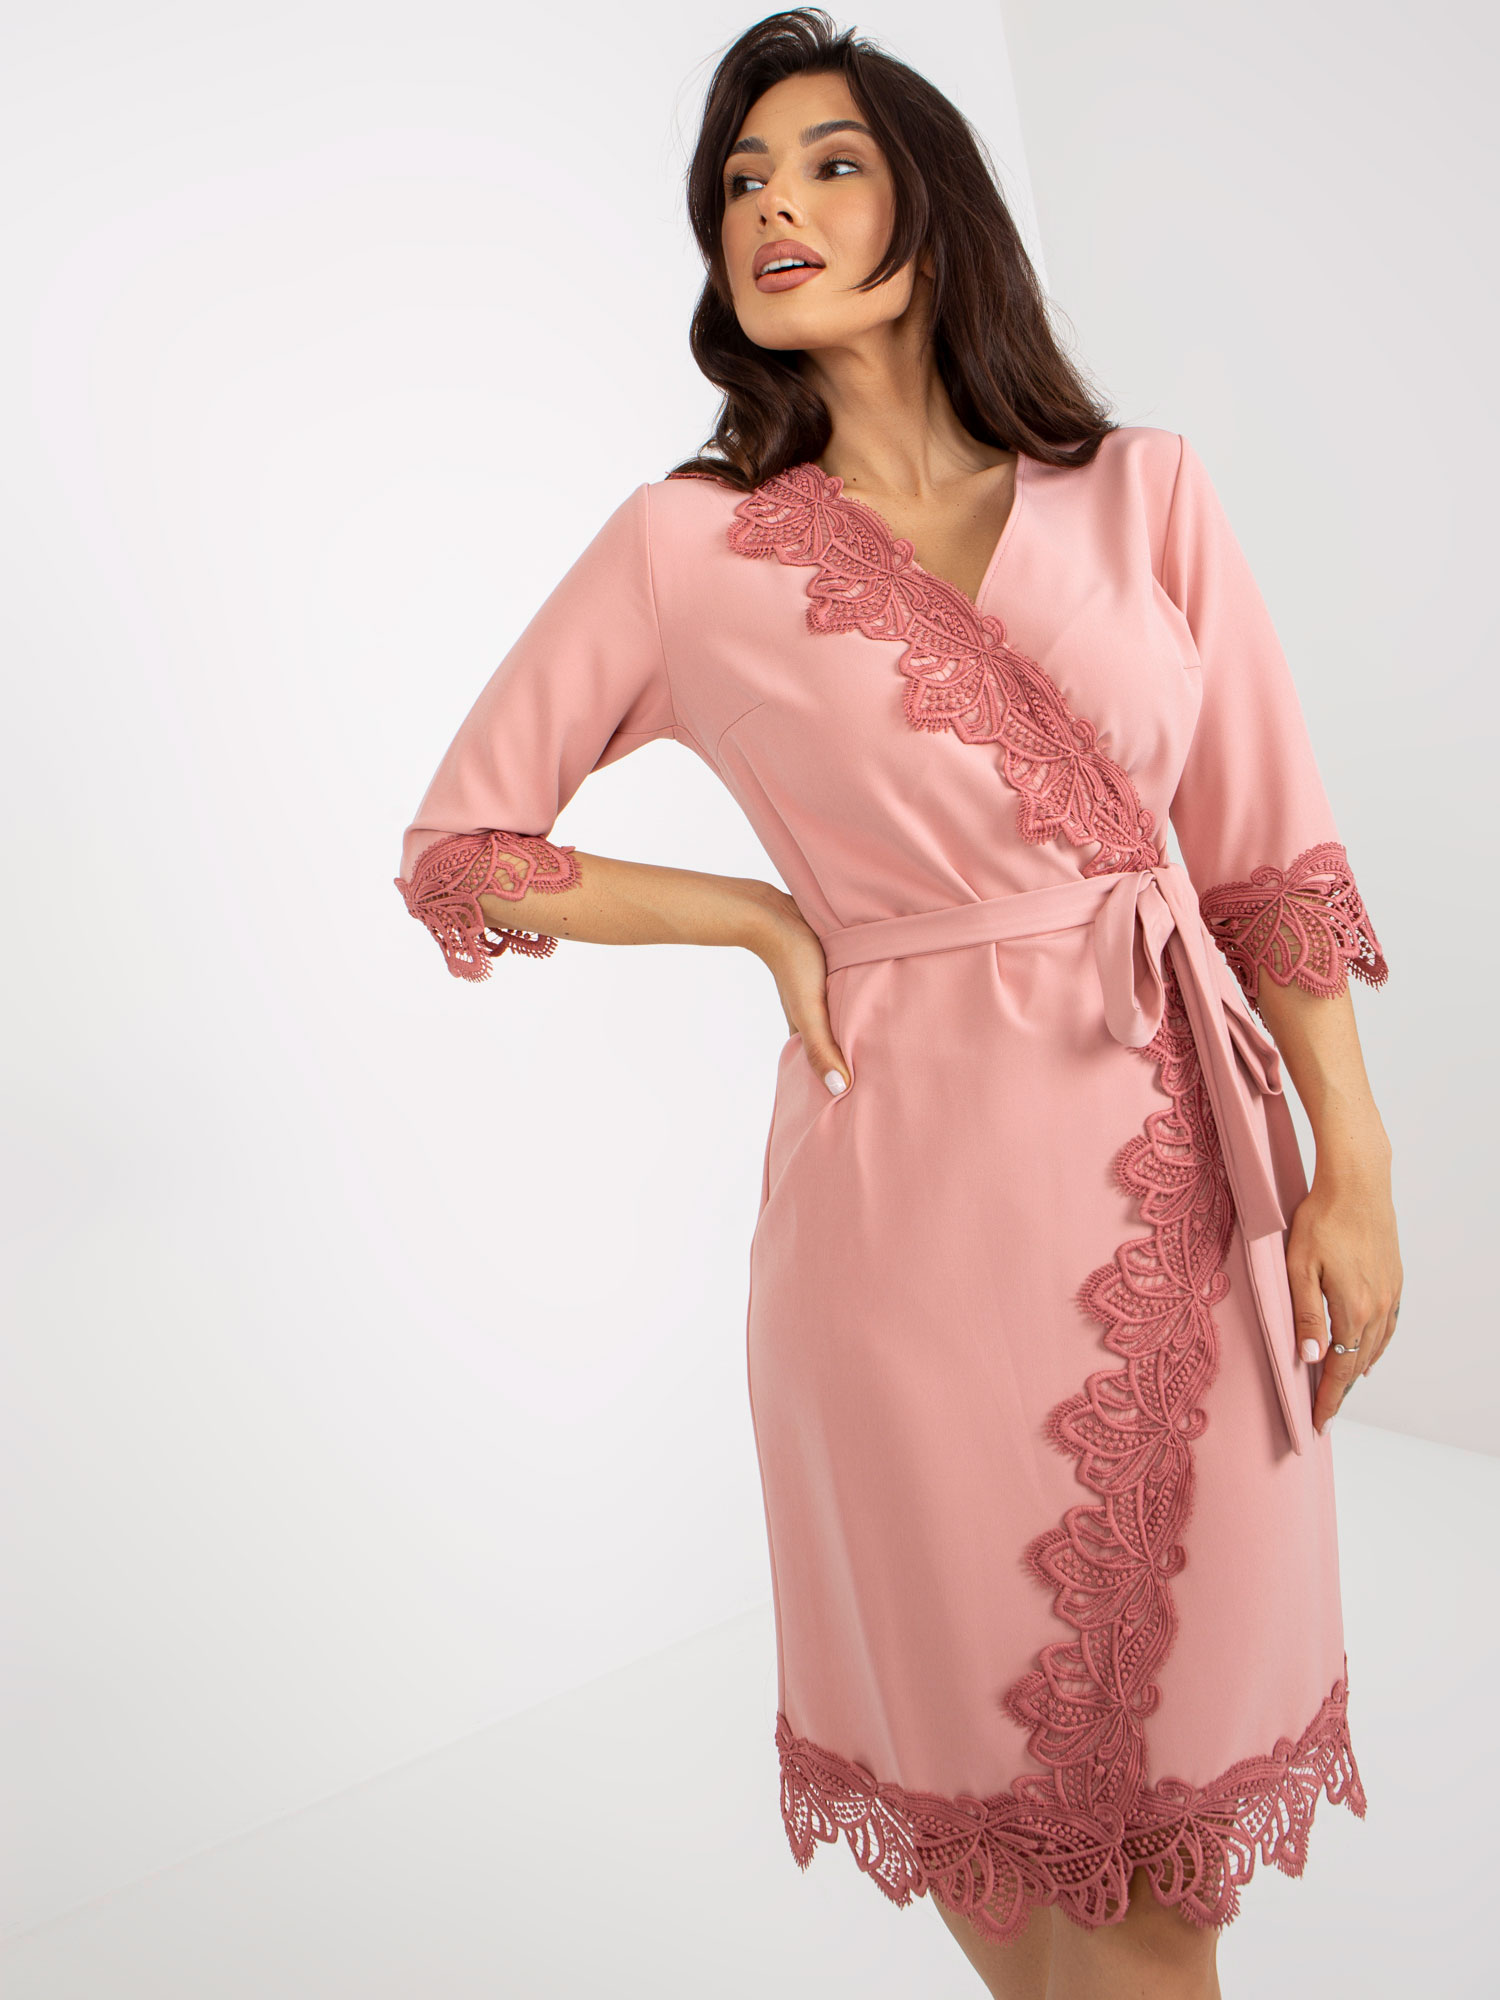 Dusty pink cocktail dress with pleats and 3/4 sleeves